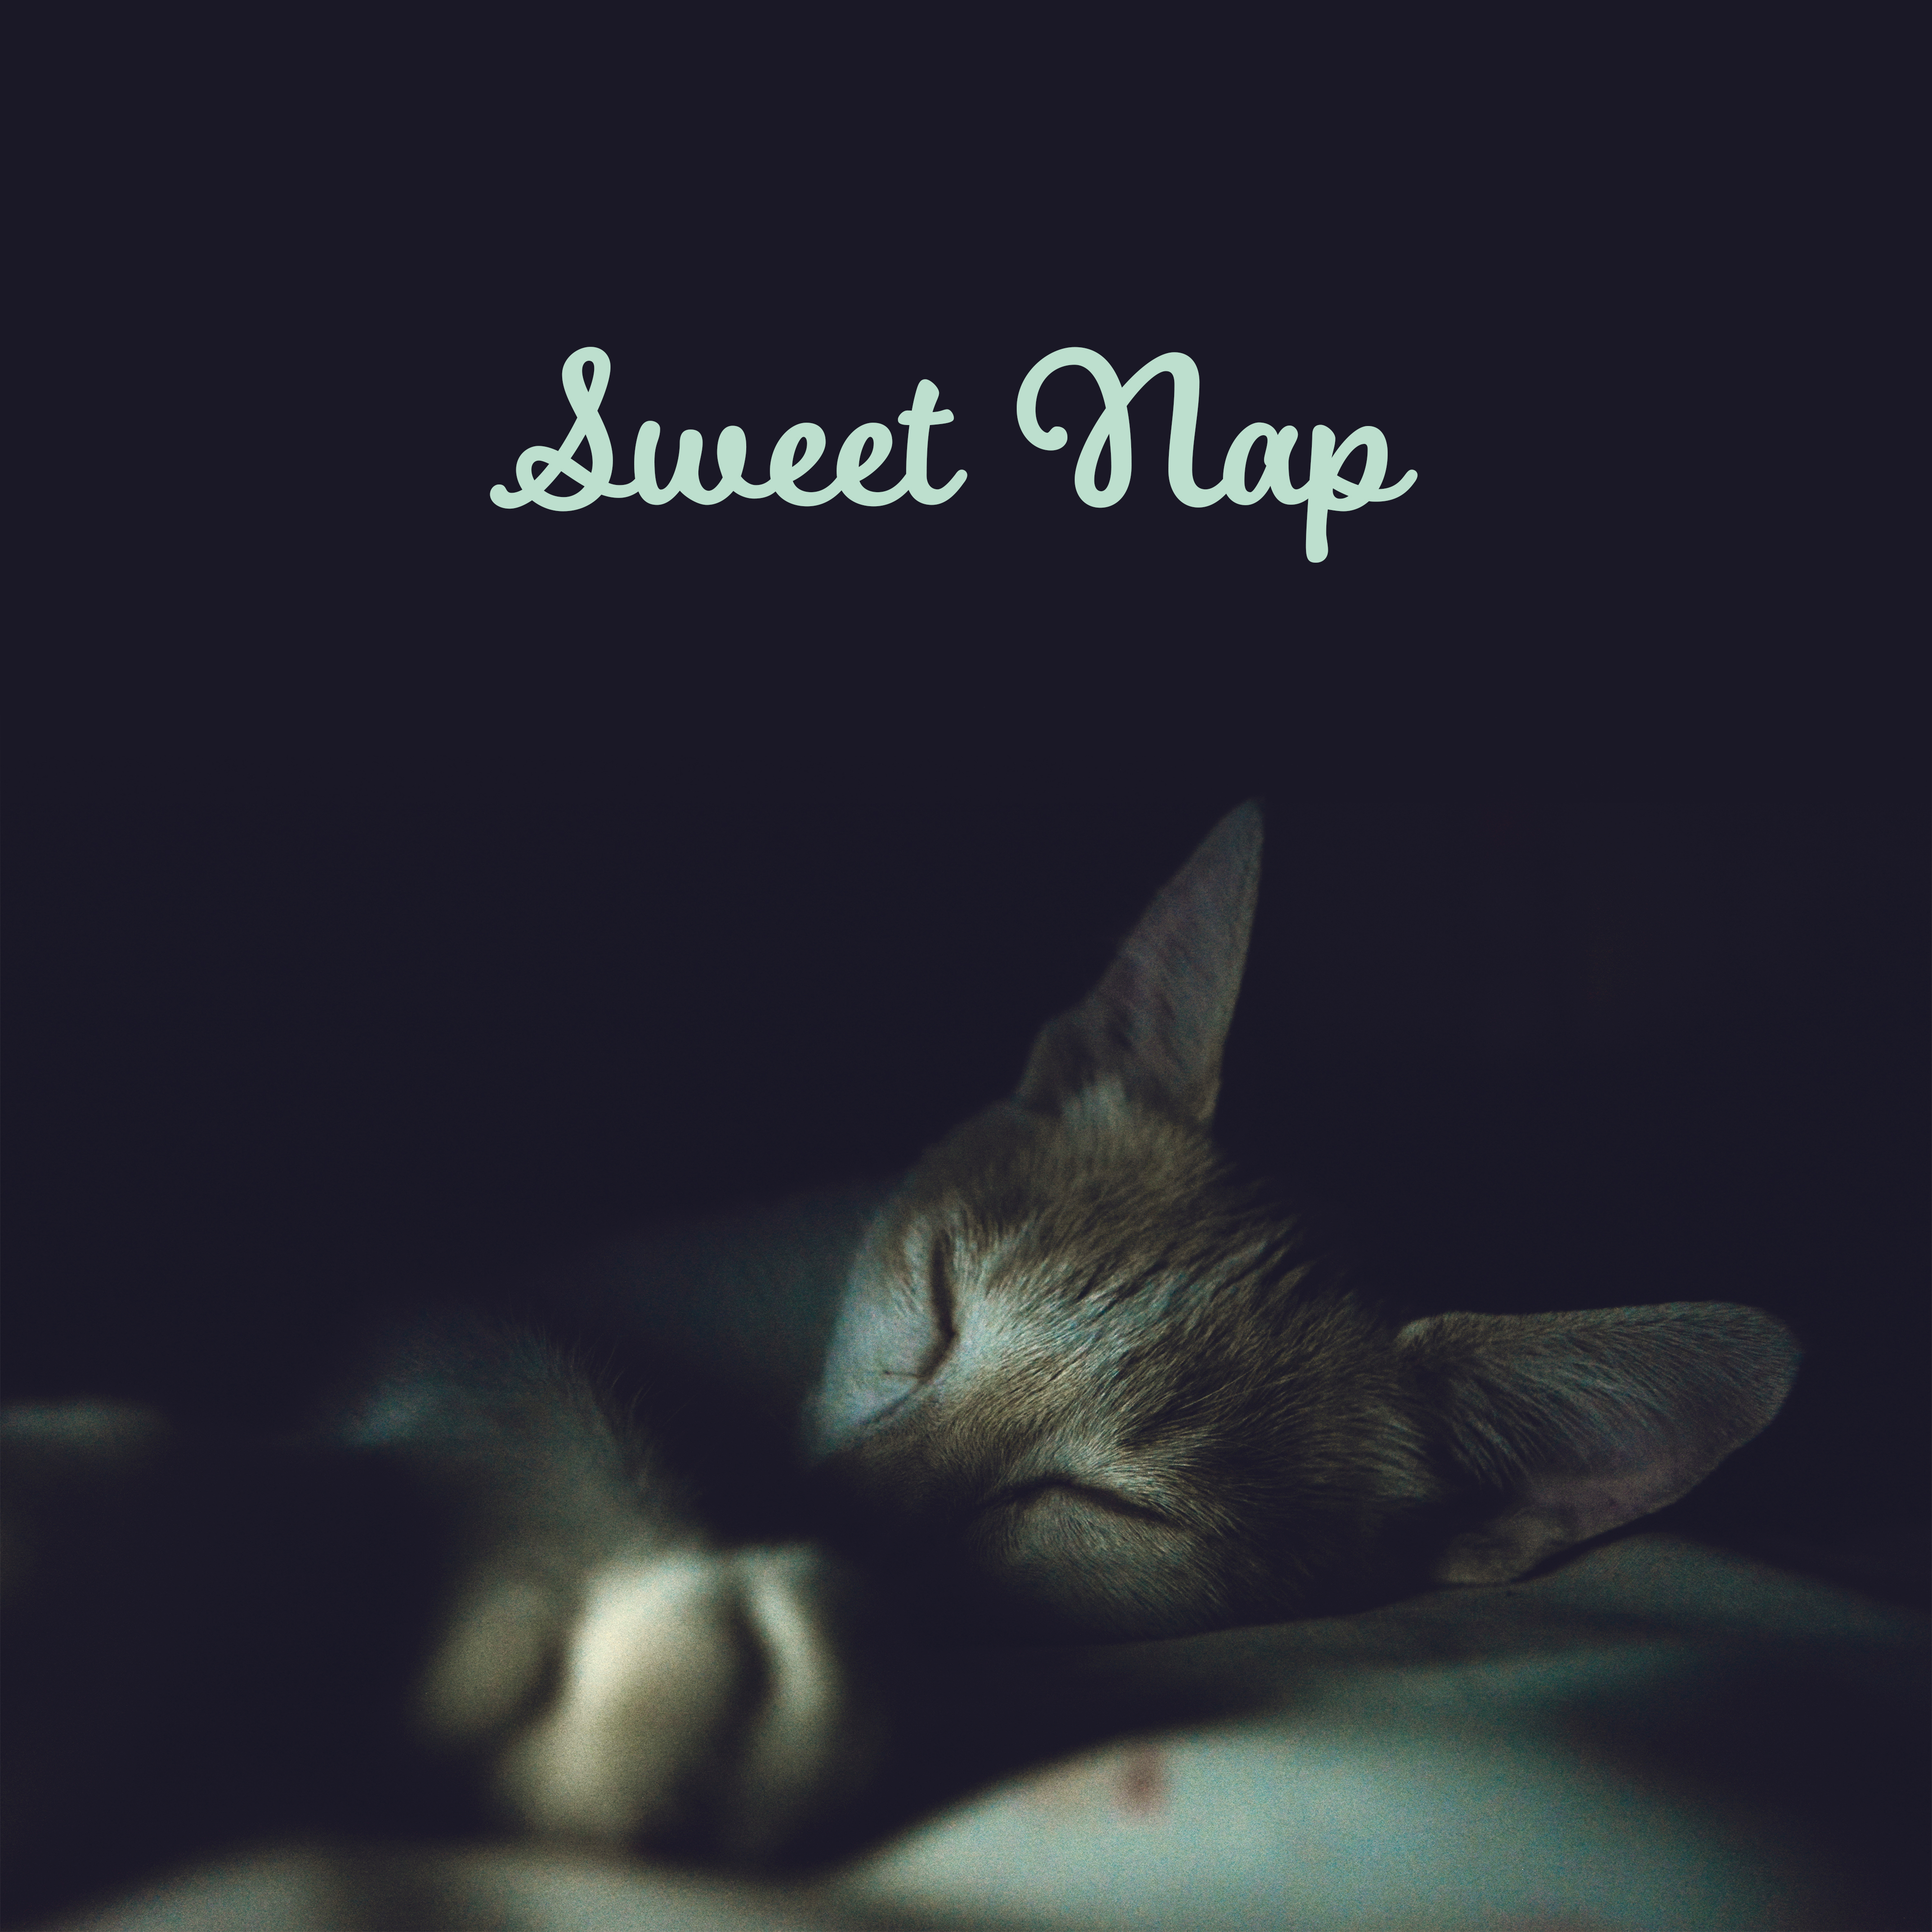 Sweet Nap  Peaceful Sounds for Sleep, Relaxation, Healing, Zen, Relief, Tranquil Sleep, Music to Pillow, Deep Dreams, Relaxing Bedtime